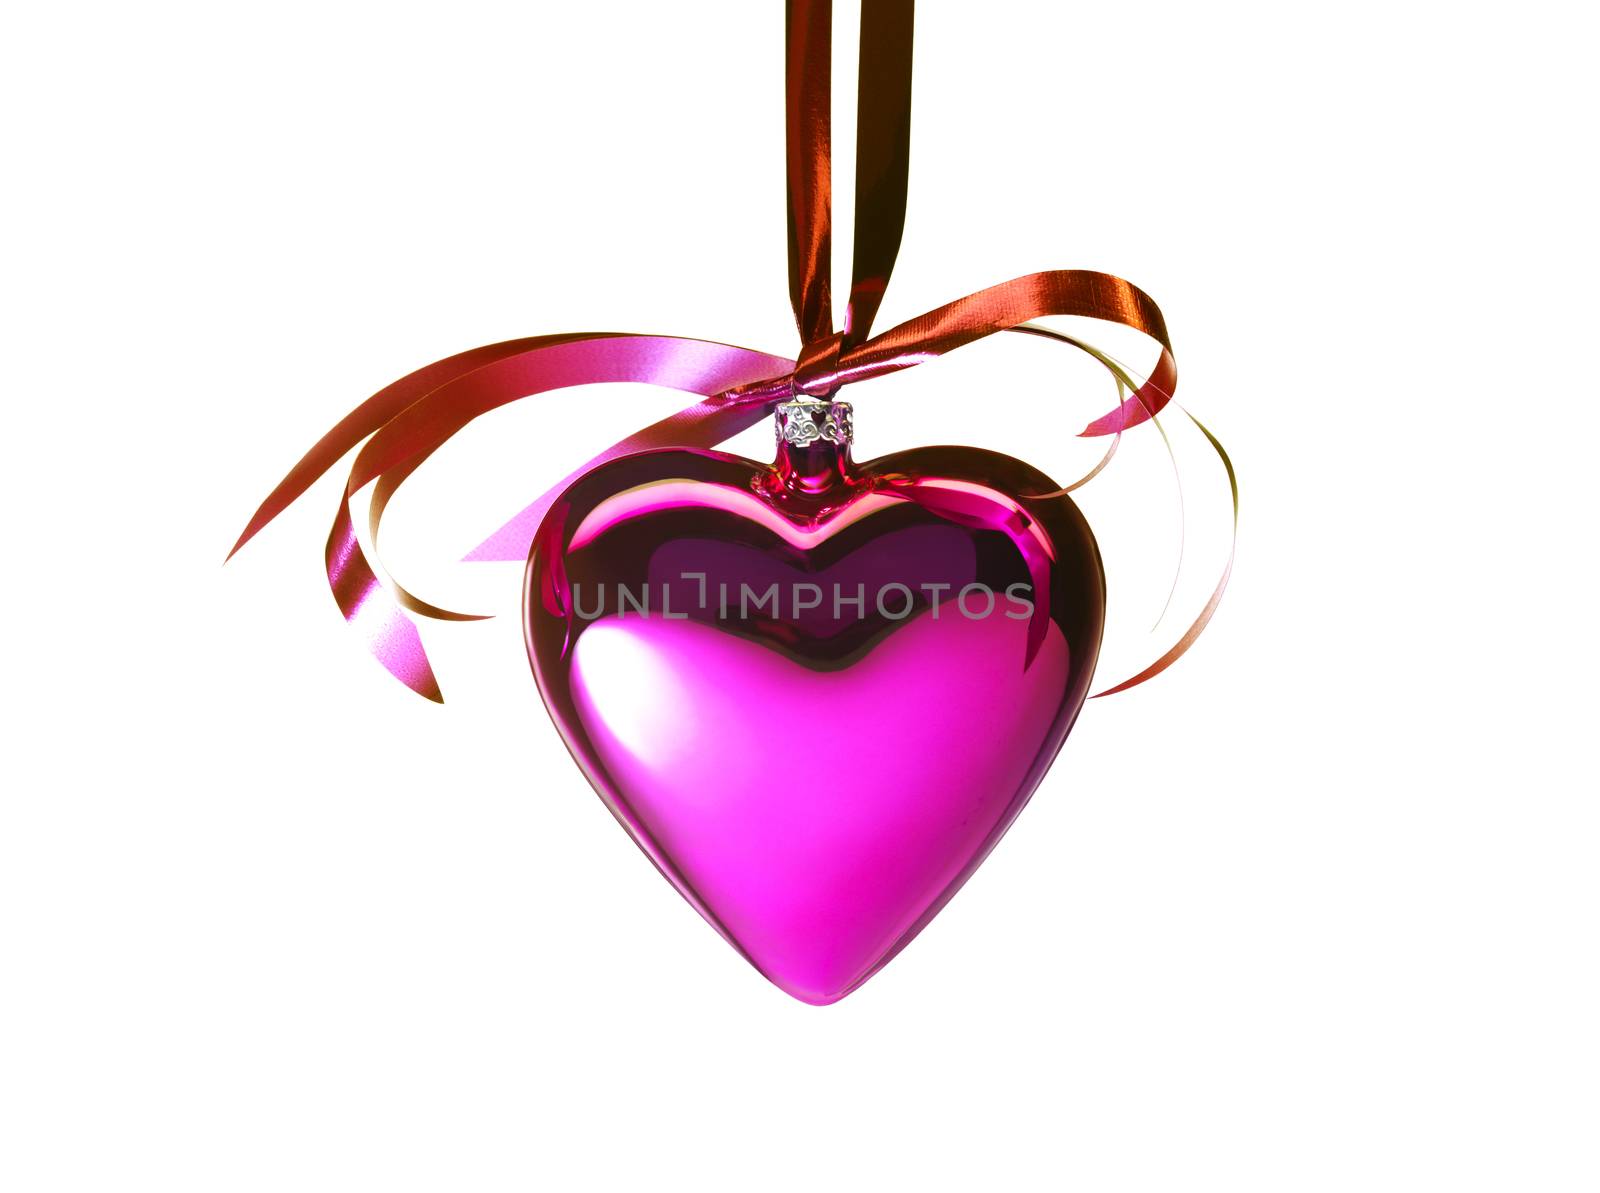 Christmas hearts against a white background by janssenkruseproductions